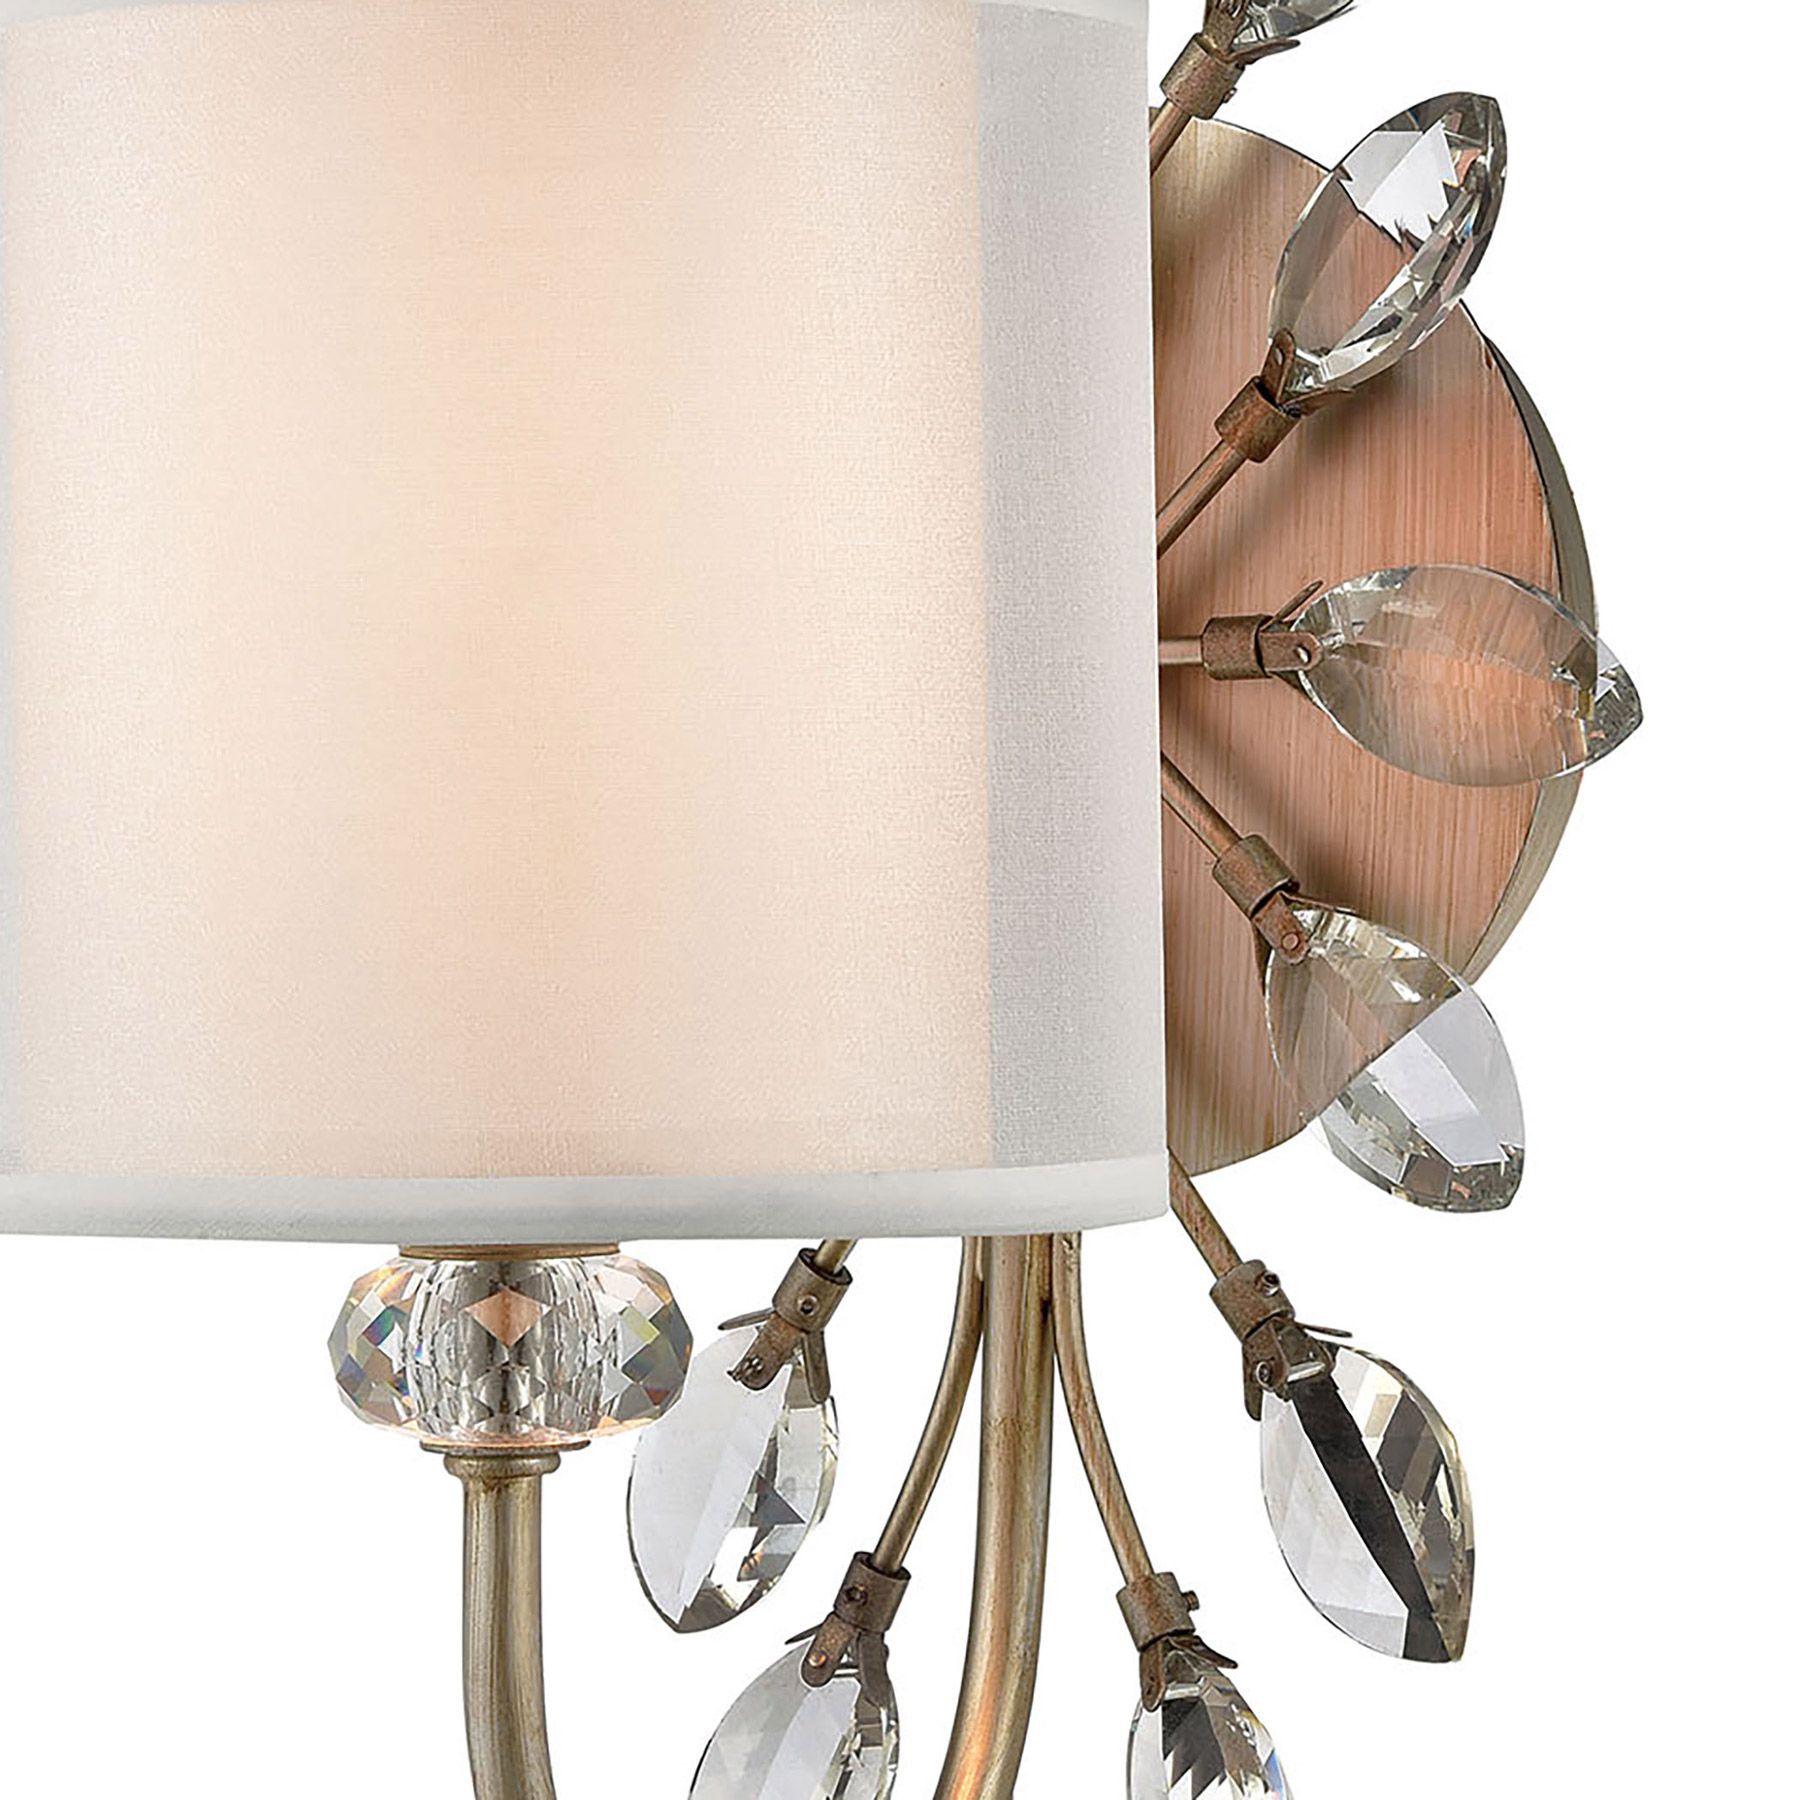 Elk Lighting 16276/1 1 Light Vanity Light In Aged Silver With White Pertaining To Aged Silver Vanity Mirrors (View 7 of 15)